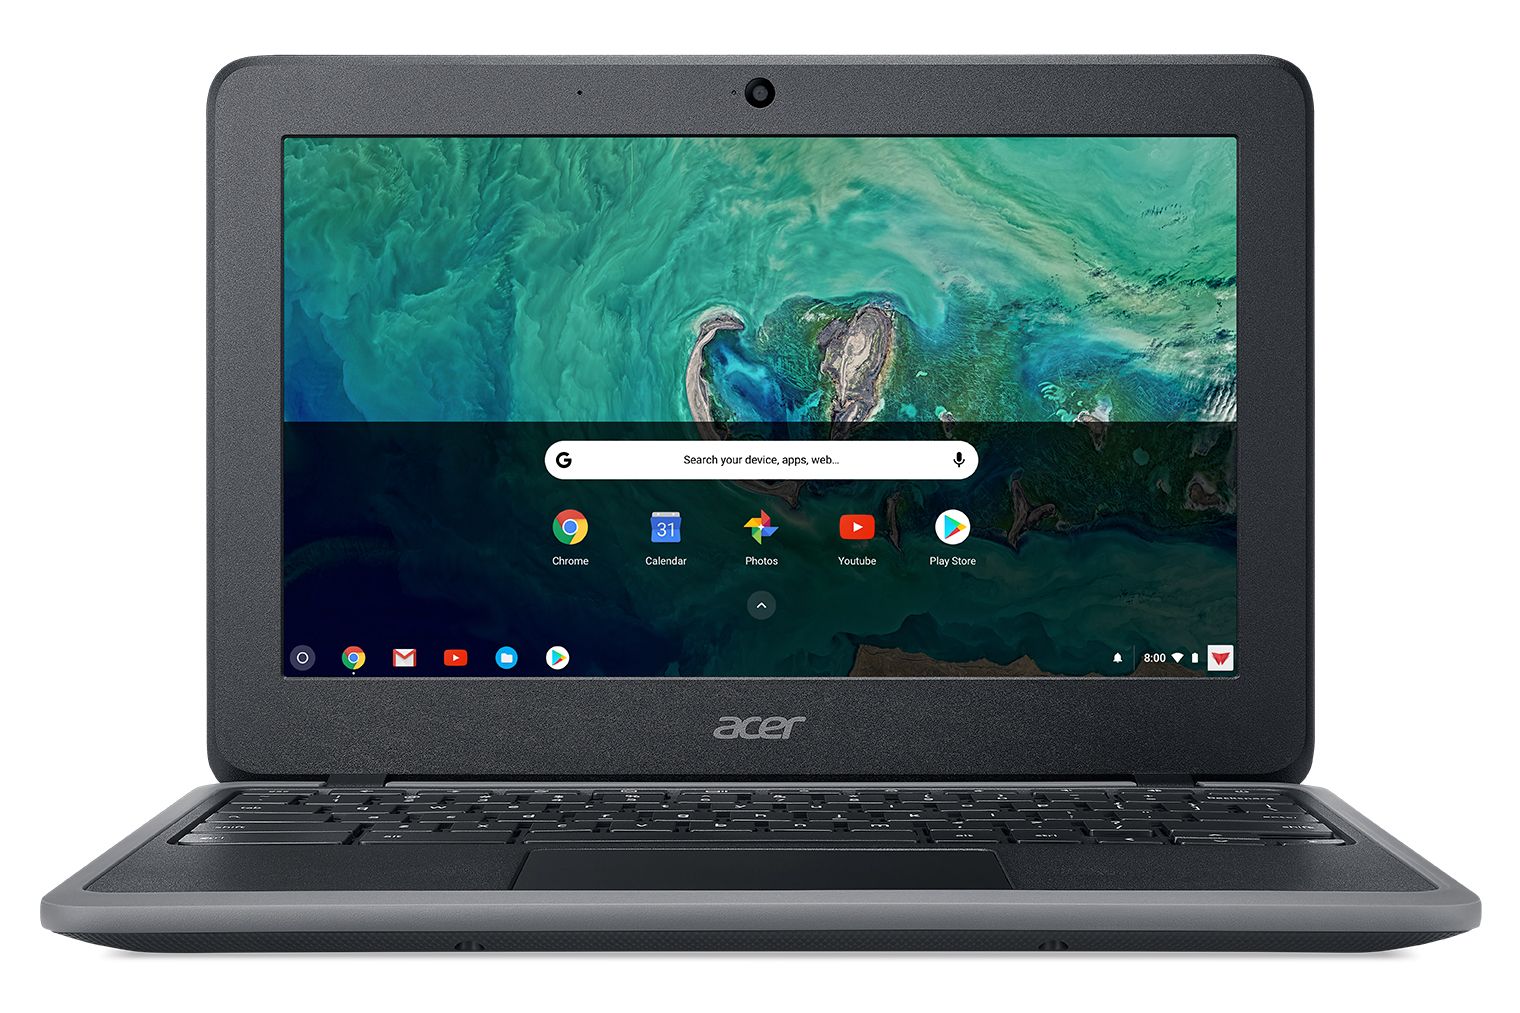 Acer launches new Chromebook 11 C732 Series